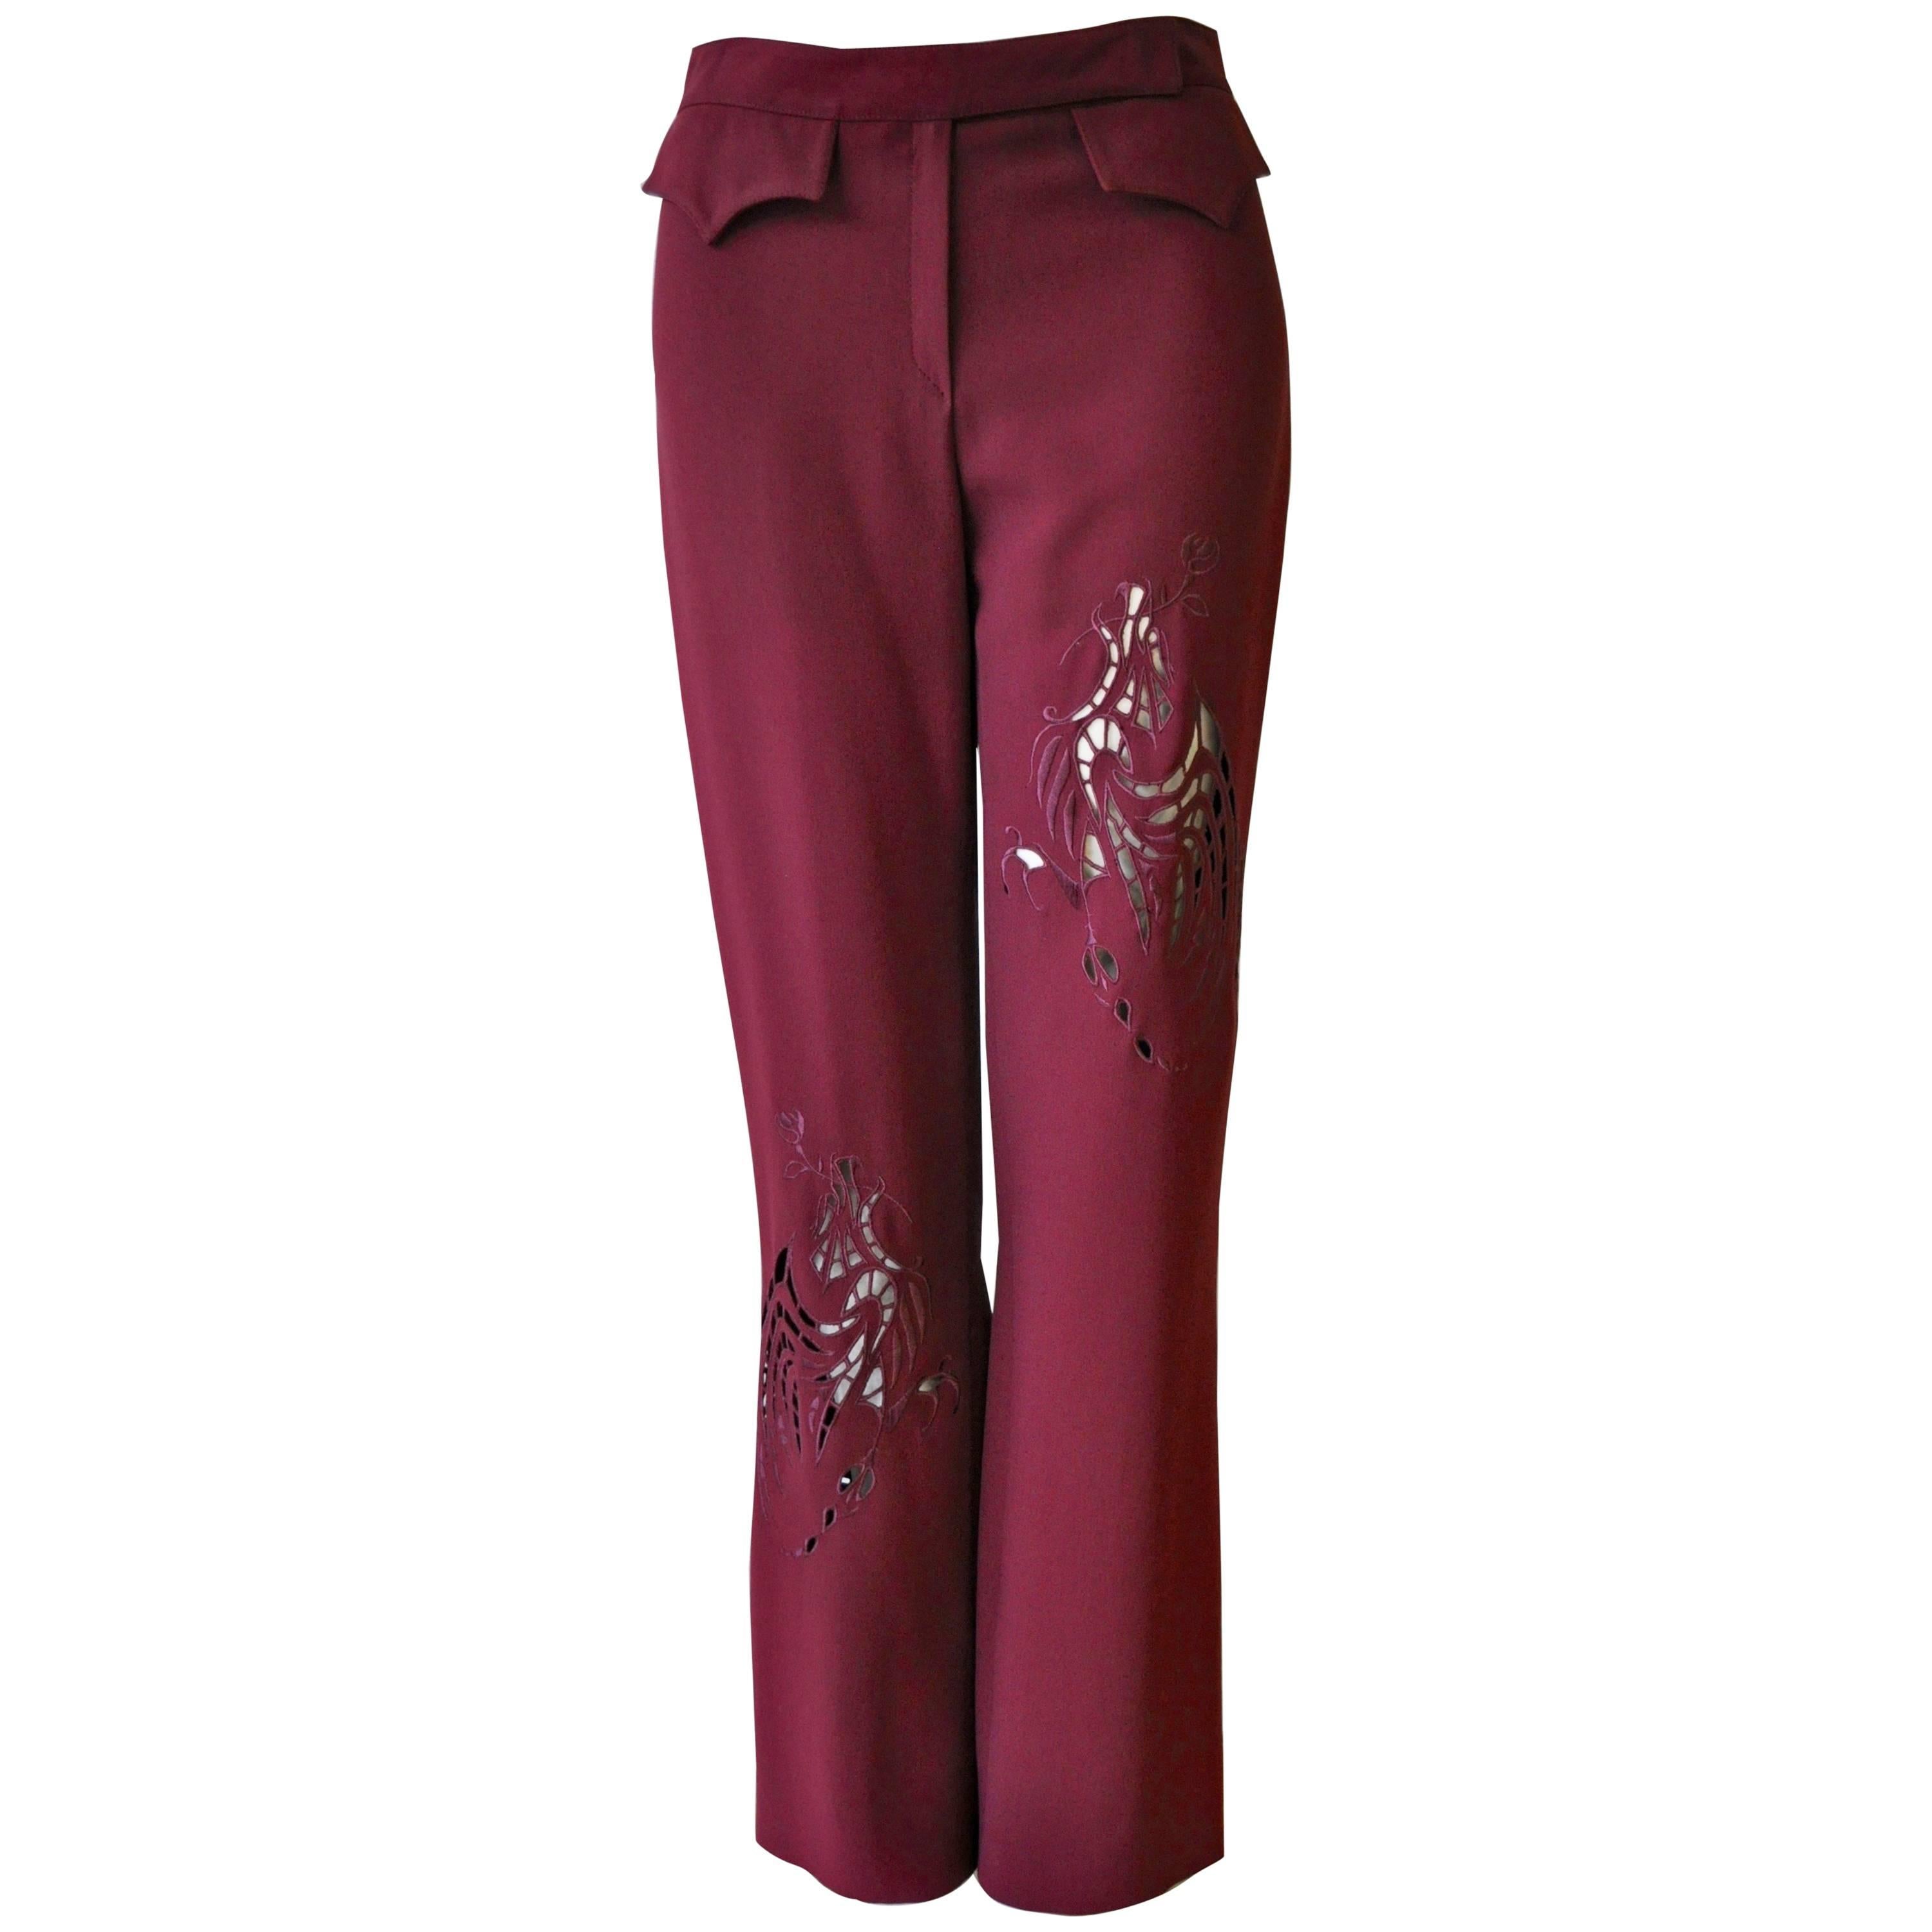 Angelo Mozzillo Higihly Original Embroidered Laser-Cut Pants For Sale